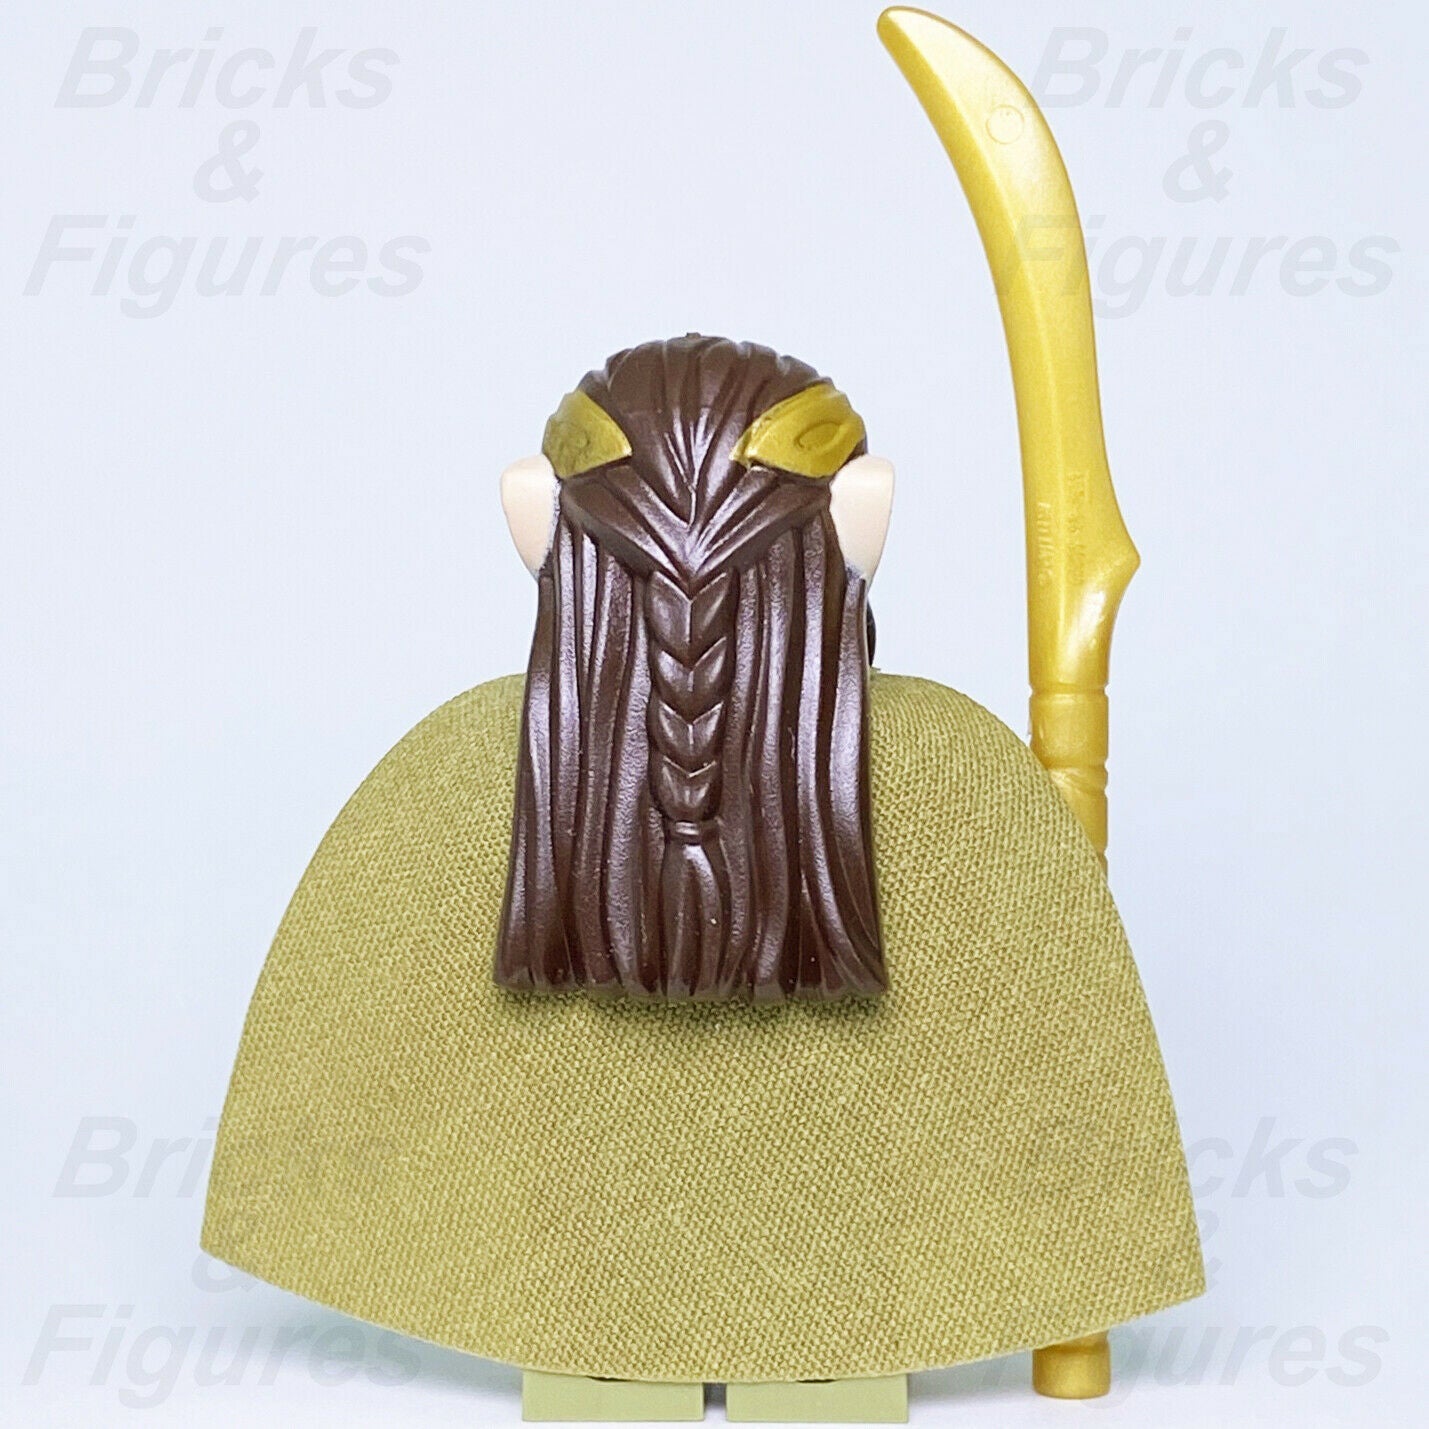 The Hobbit LEGO Elrond Rivendell Elf Lord of the Rings Minifigure 79015 lor105 - Bricks & Figures